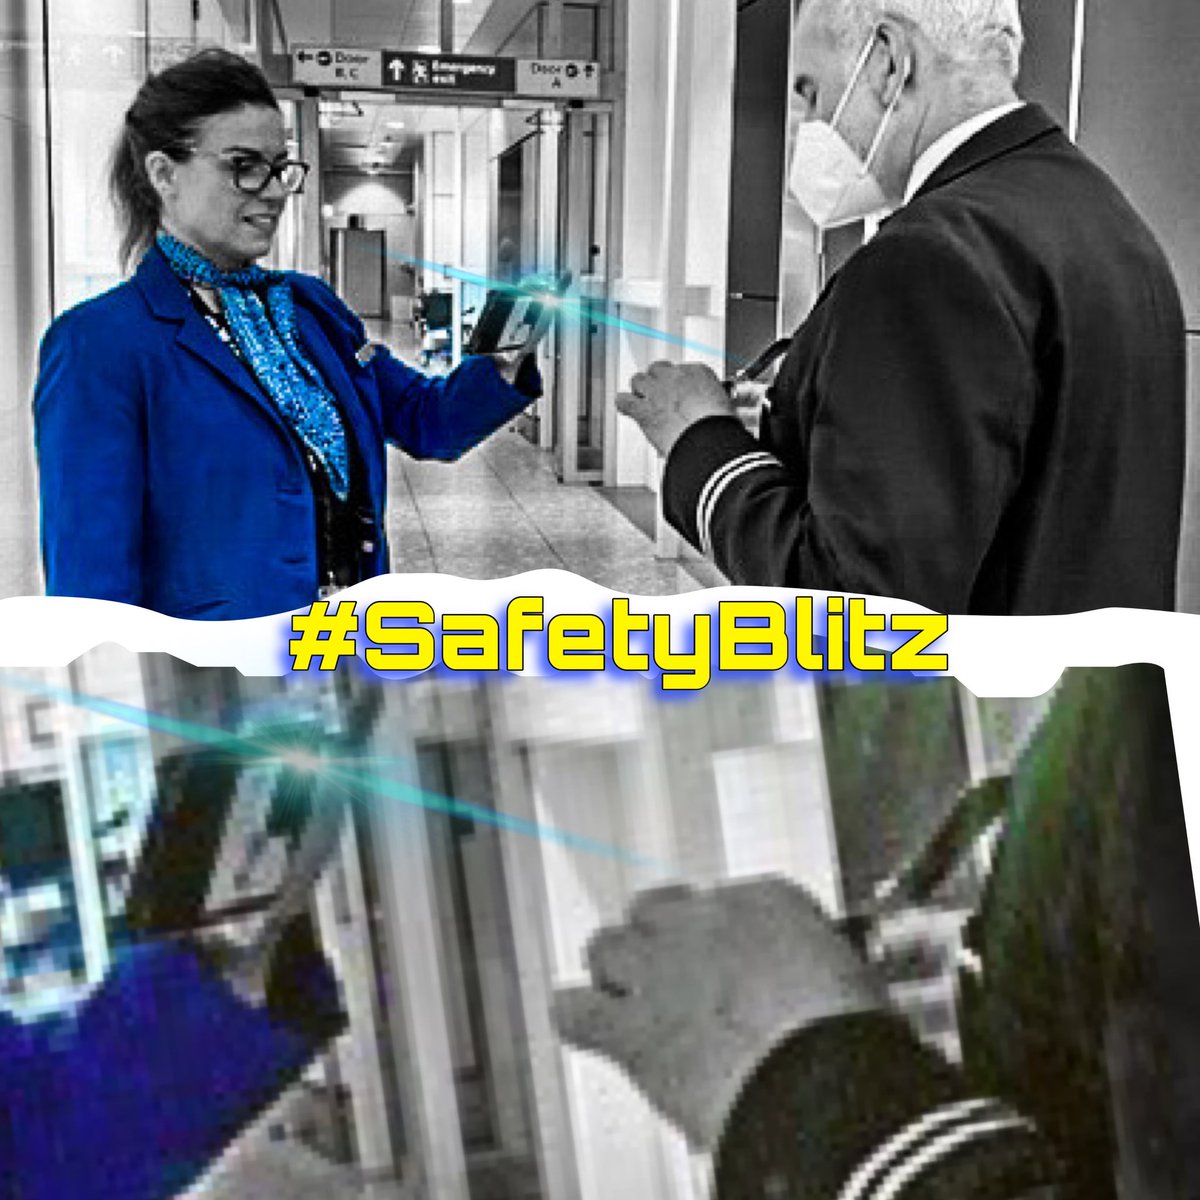 As #SafetyBlitz at LHR - Week 1 comes to an end, our Agents have been & will continue to ensure crew minimum is met before commencing passenger boarding. @AOSafetyUAL @SafetyLHR @aaronsmythe @weareunited #BeingUnited @UALondonLegends #NoSmallRolesInSafety #SafetyIOwnIt